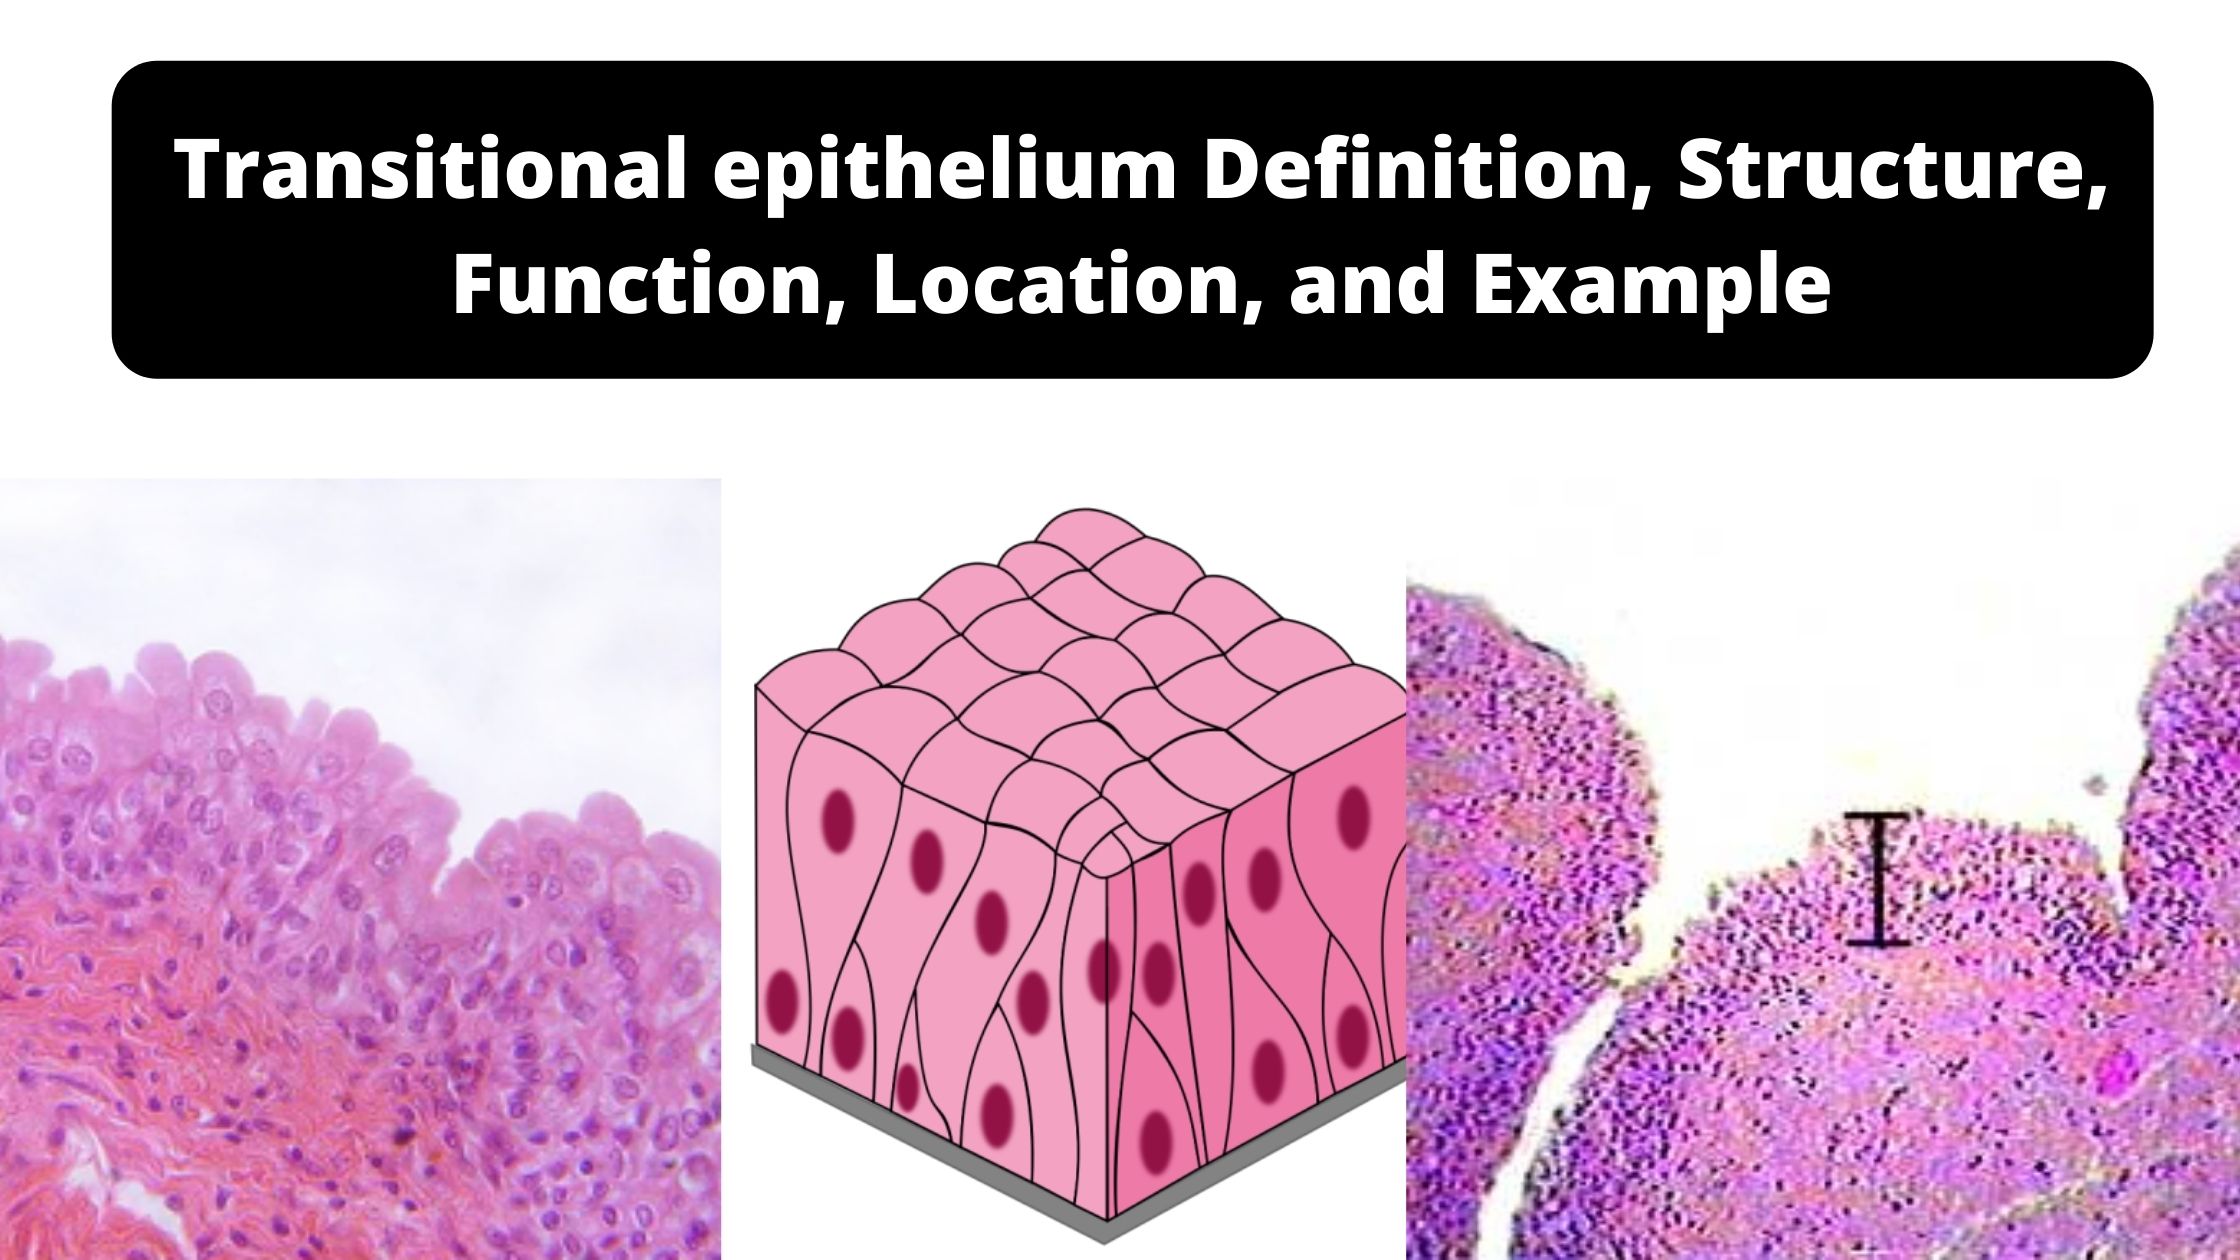 Transitional epithelium Definition, Structure, Function, Location, and